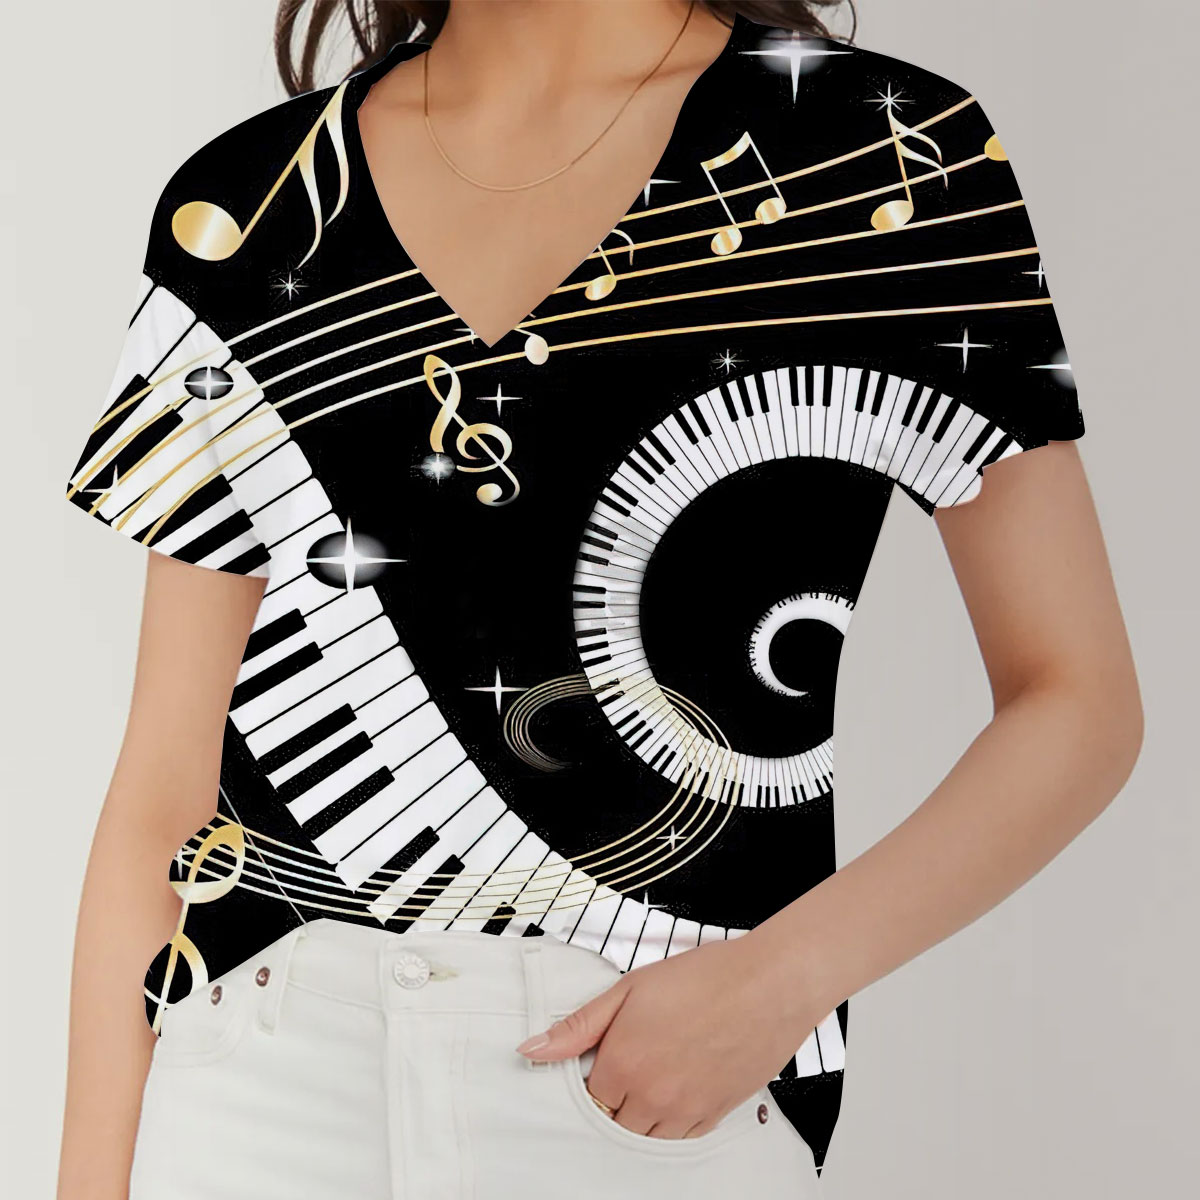 Stunning Funk with Piano V-Neck Women's T-Shirt